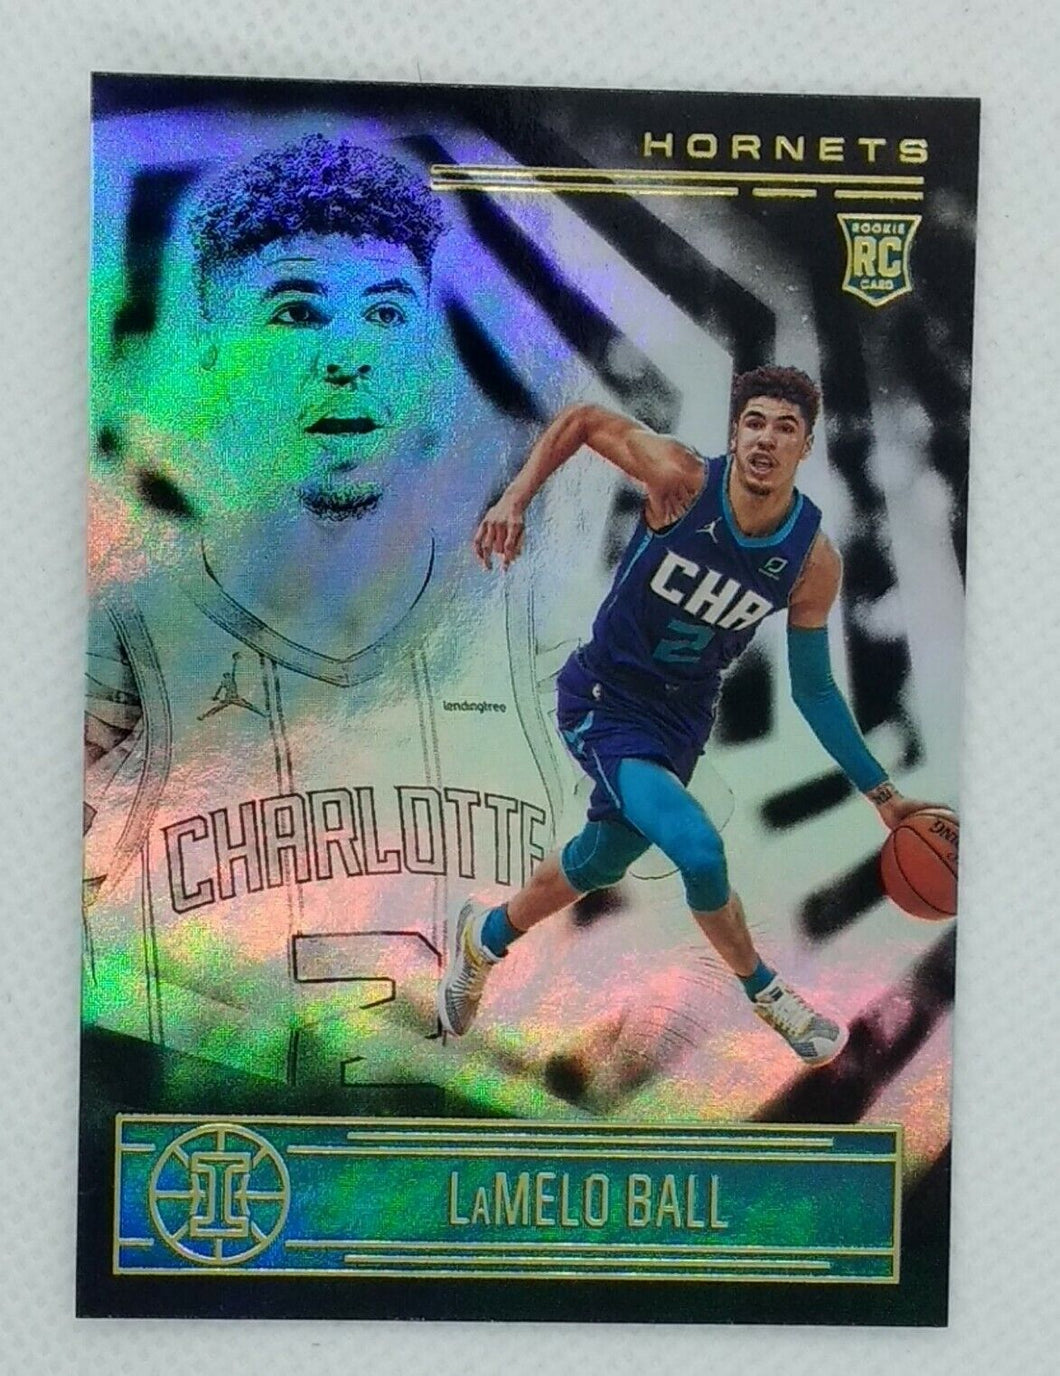 2020-21 Panini Illusions LAMELO BALL Rookie Card RC #151 Charlotte Hornets